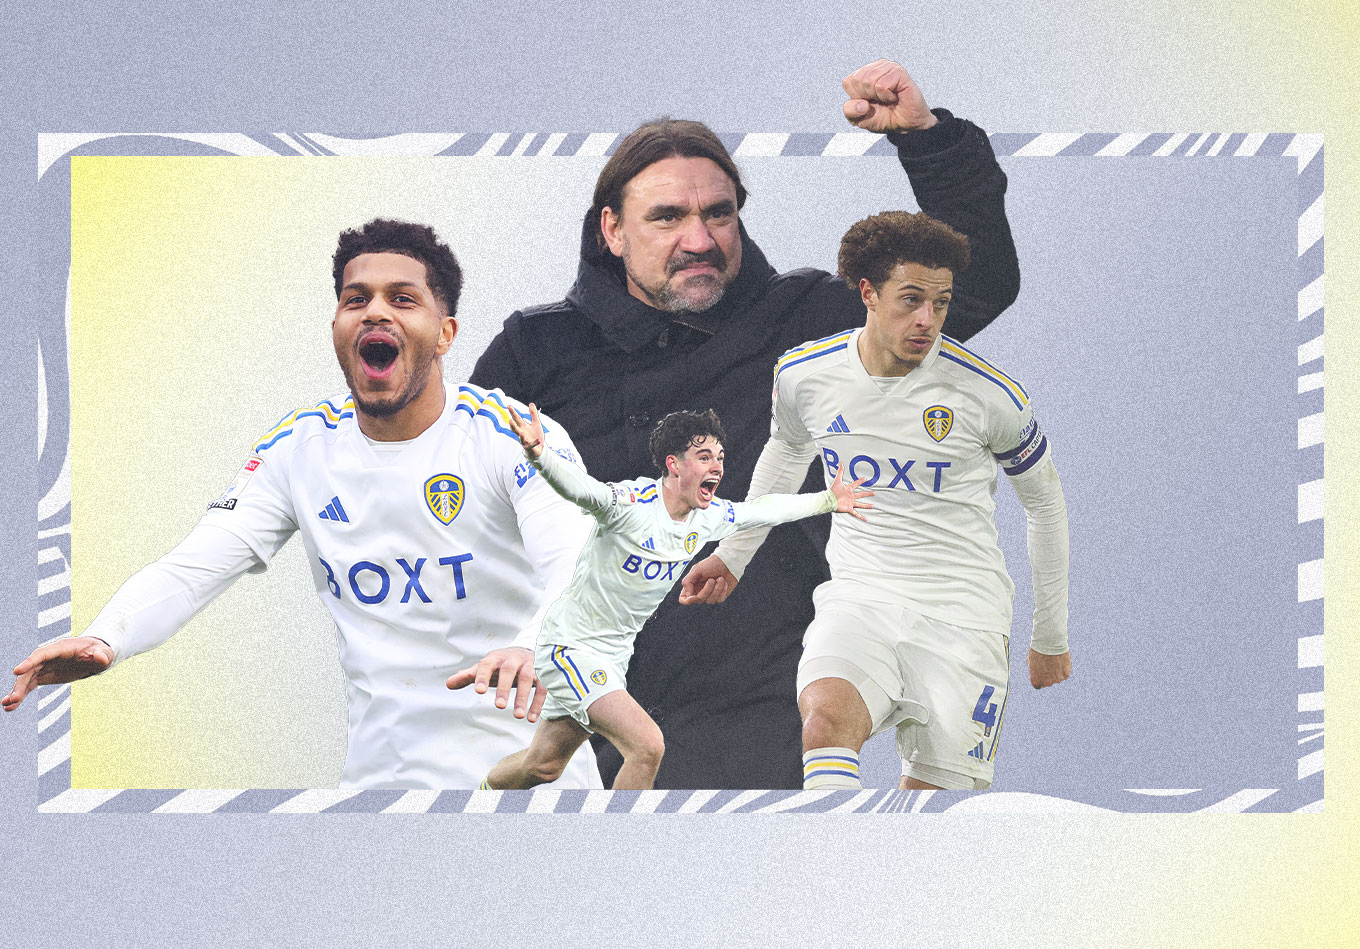 Leeds United promoted to Premier League as champions, Football News